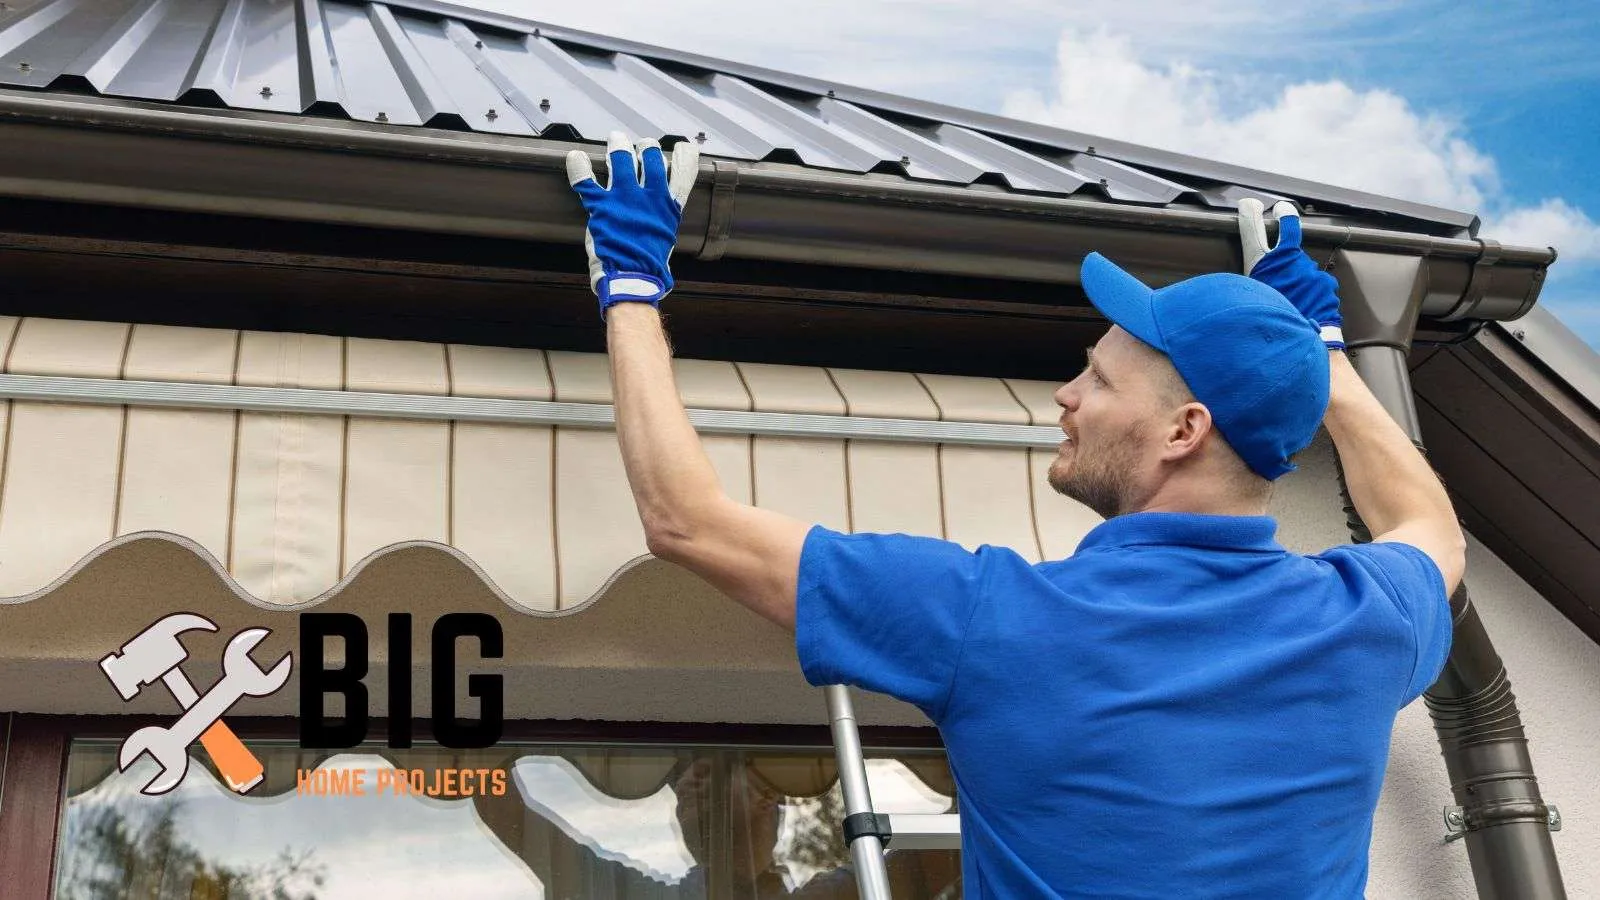 Man installing roofing gutters - bighomeprojects.com